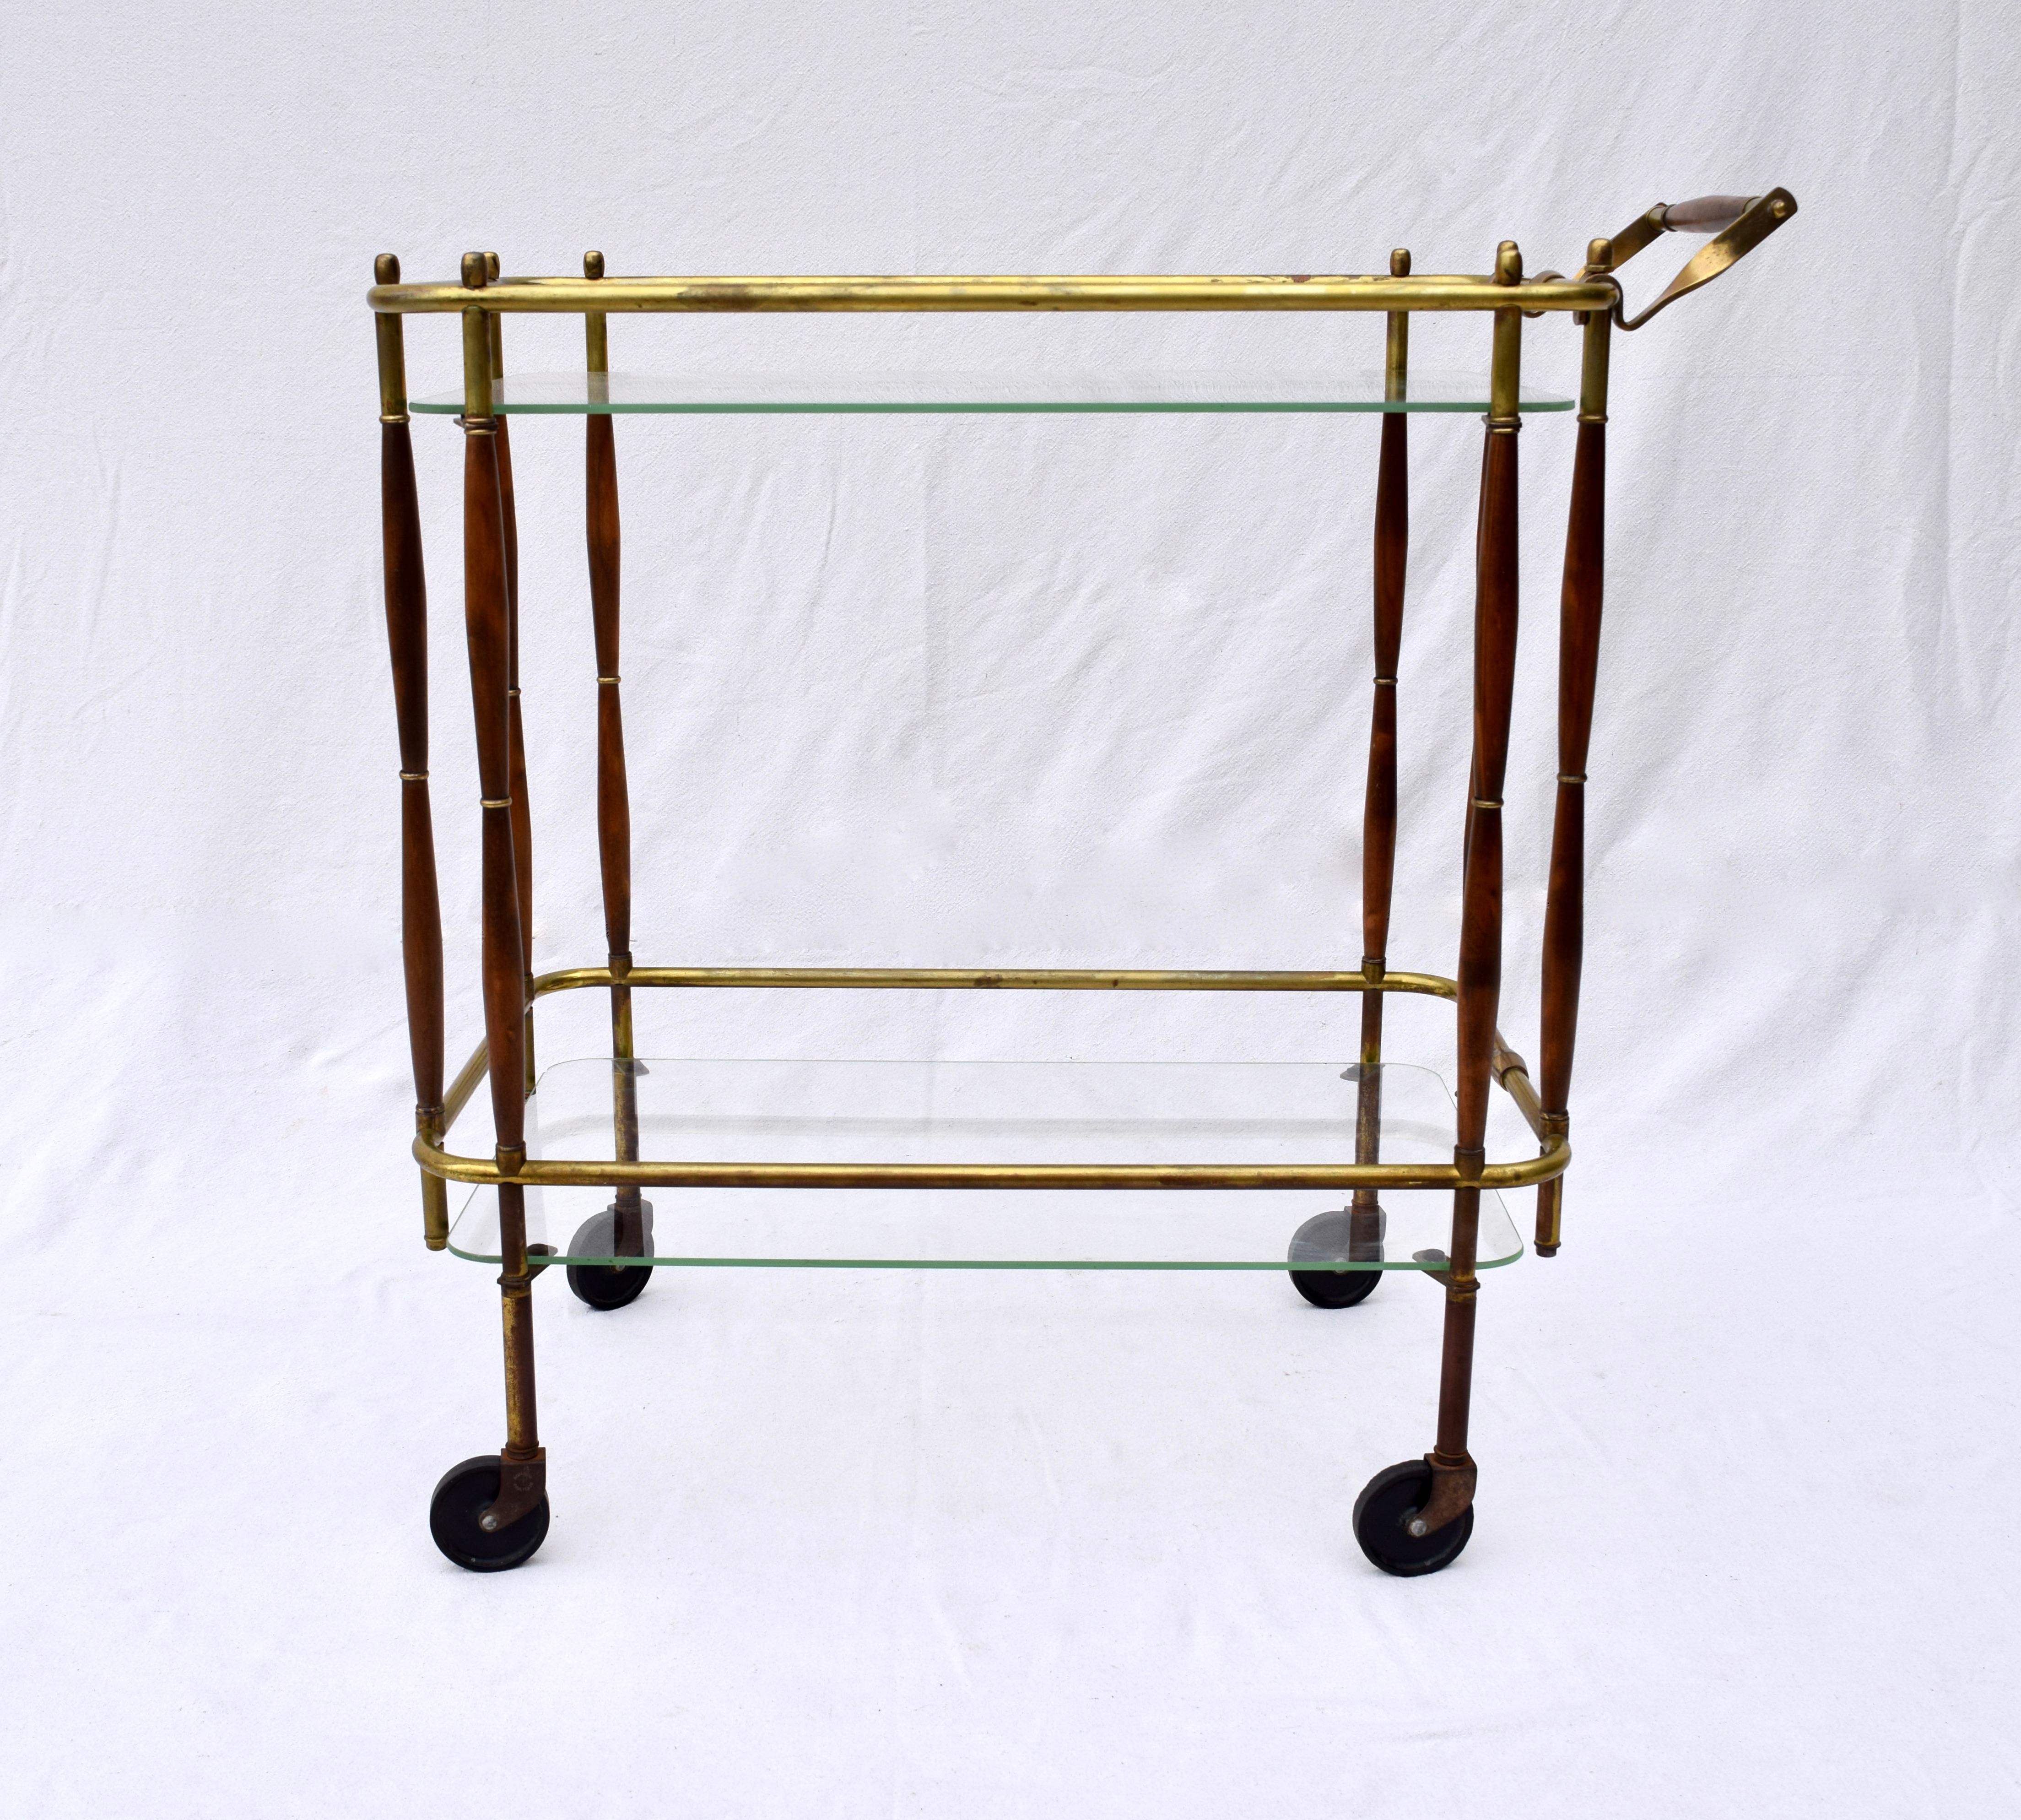 Midcentury bar cart of brass, walnut and two tiers of removable glass on casters, circa 1950. We have maintained the all original, beautifully patinated and tarnished finish in lovely vintage condition. Handle is 33.5 inches high.